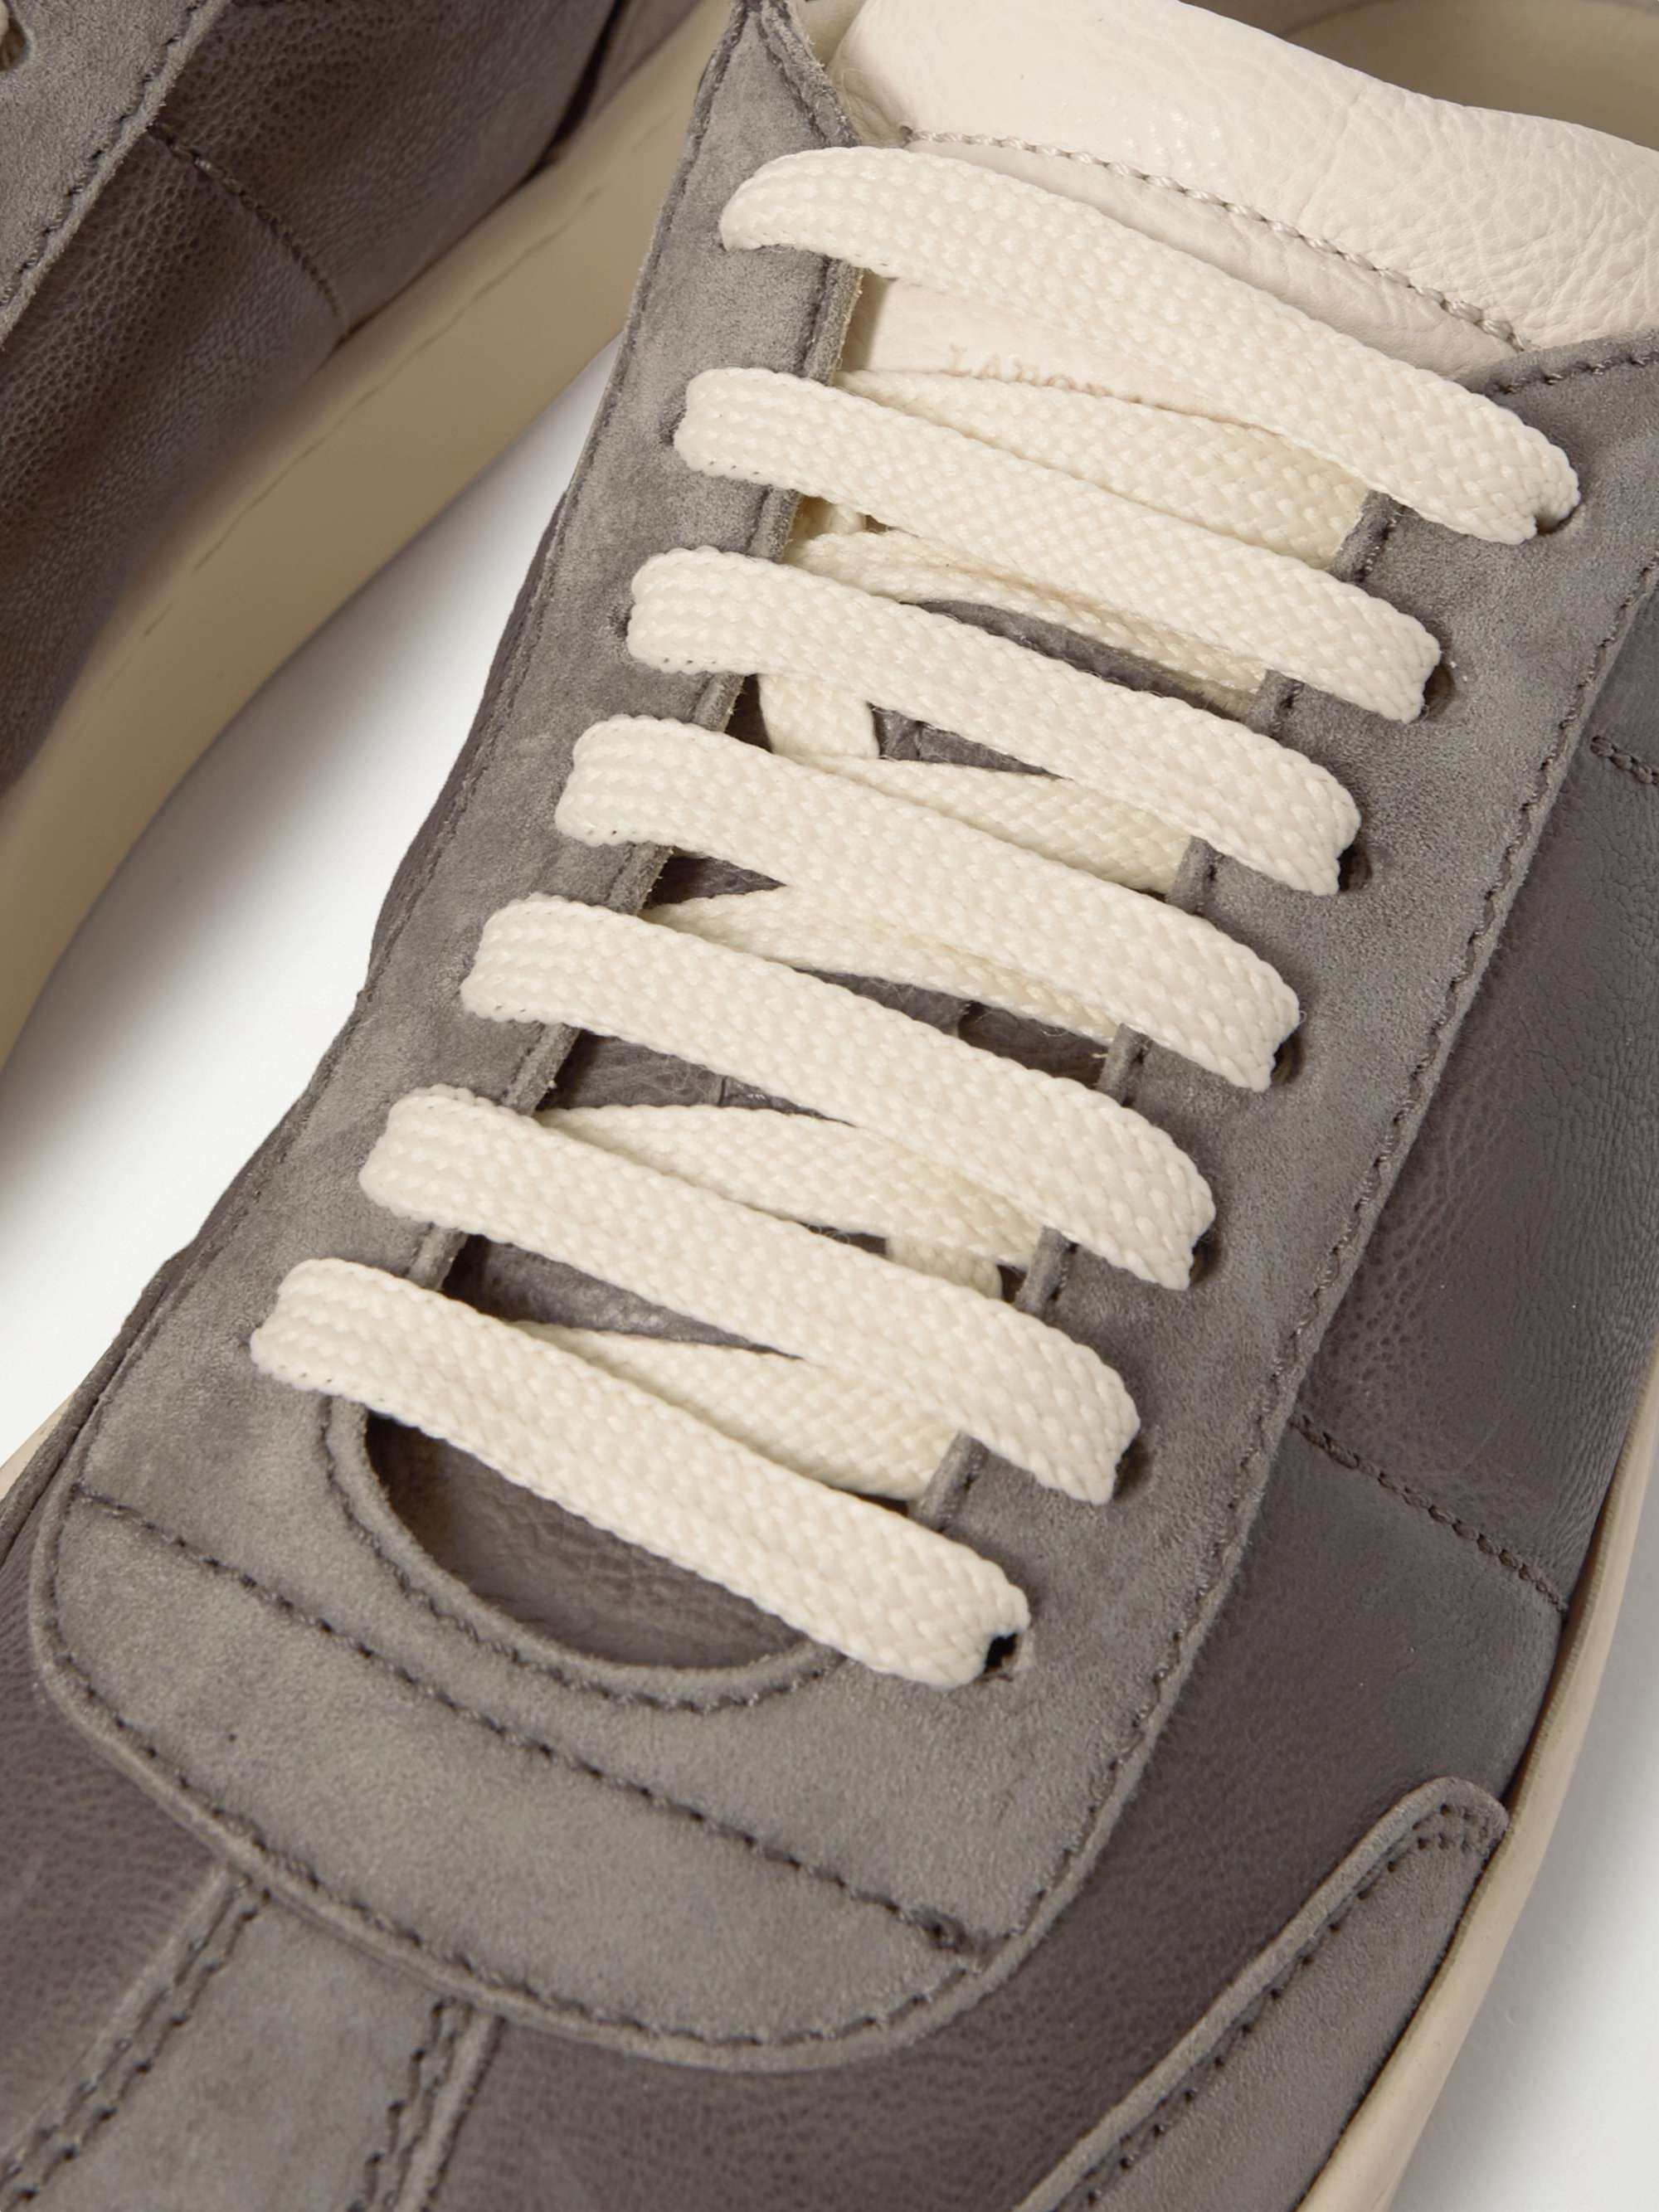 OFFICINE CREATIVE Kombined Suede-Trimmed Leather Sneakers